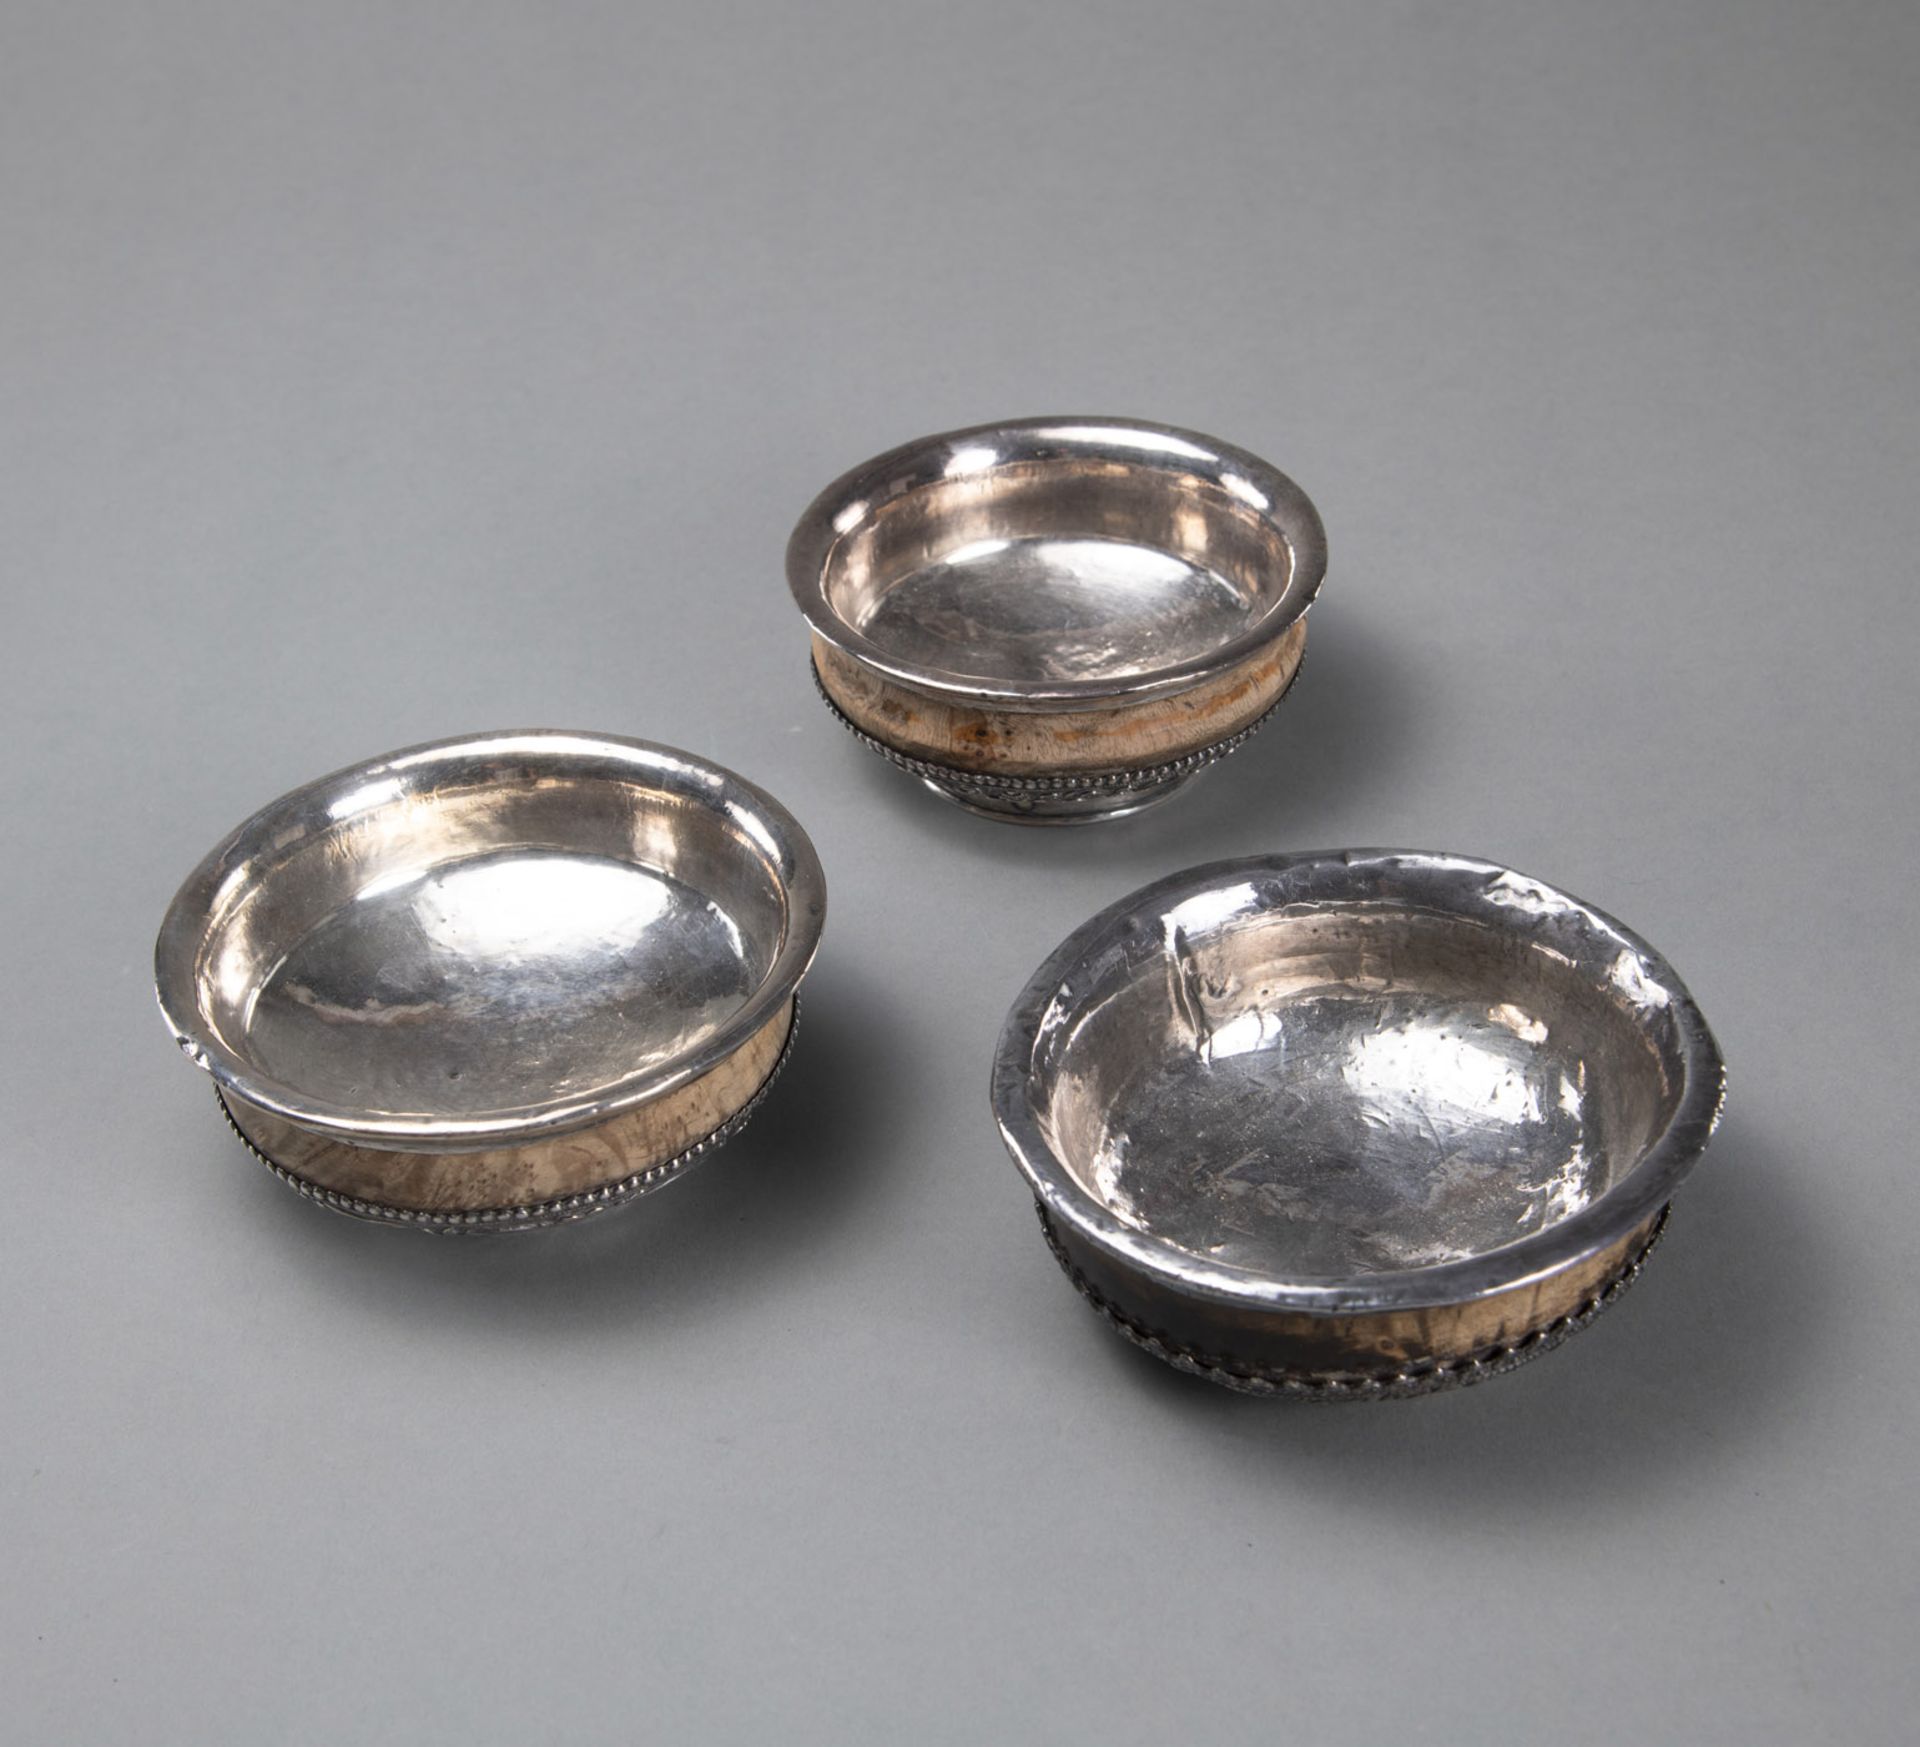 THREE ROOT WOODEN TEA BOWLS (PHORBA), PARTLY MOUNTED WITH SILVER, DECORATED WITH DRAGONS AND BUDDHI - Image 2 of 3